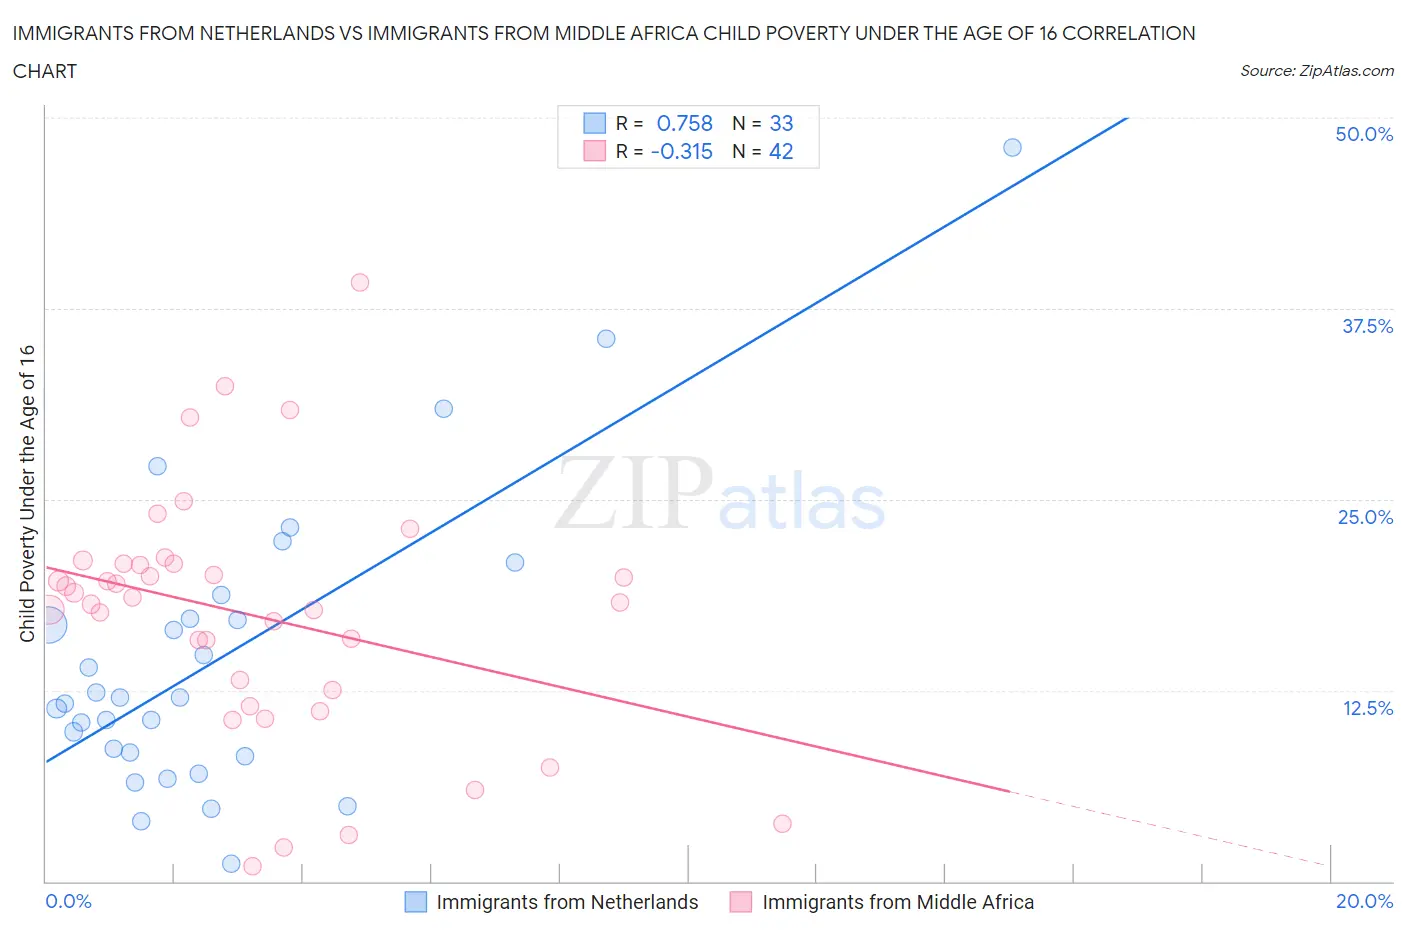 Immigrants from Netherlands vs Immigrants from Middle Africa Child Poverty Under the Age of 16